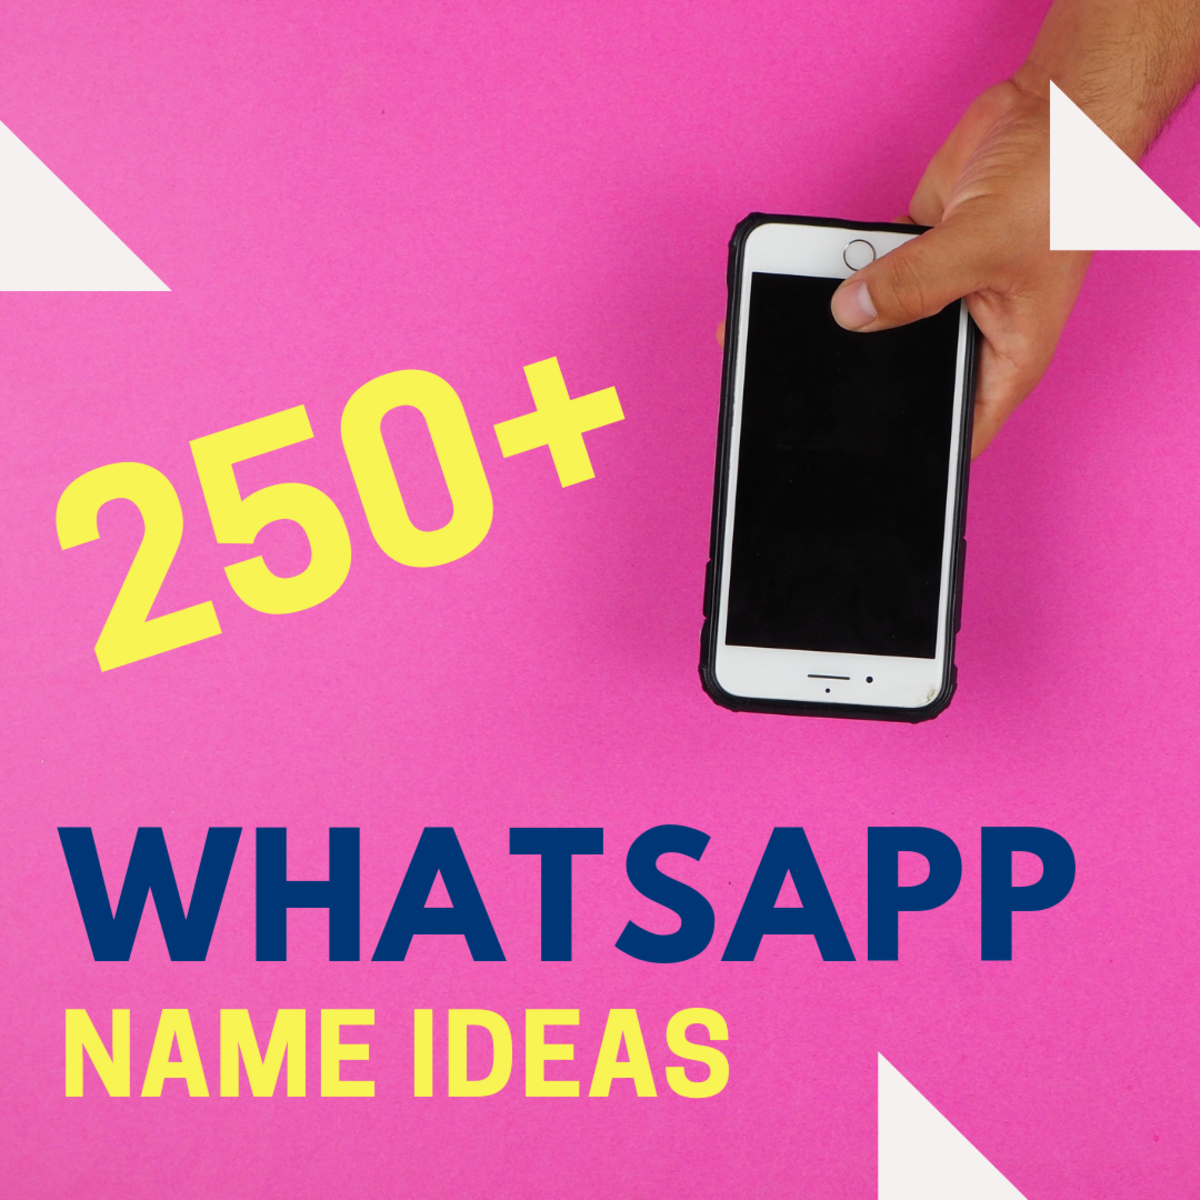 250 Whatsapp Group Name Ideas Funny Cool Ideas For Family And